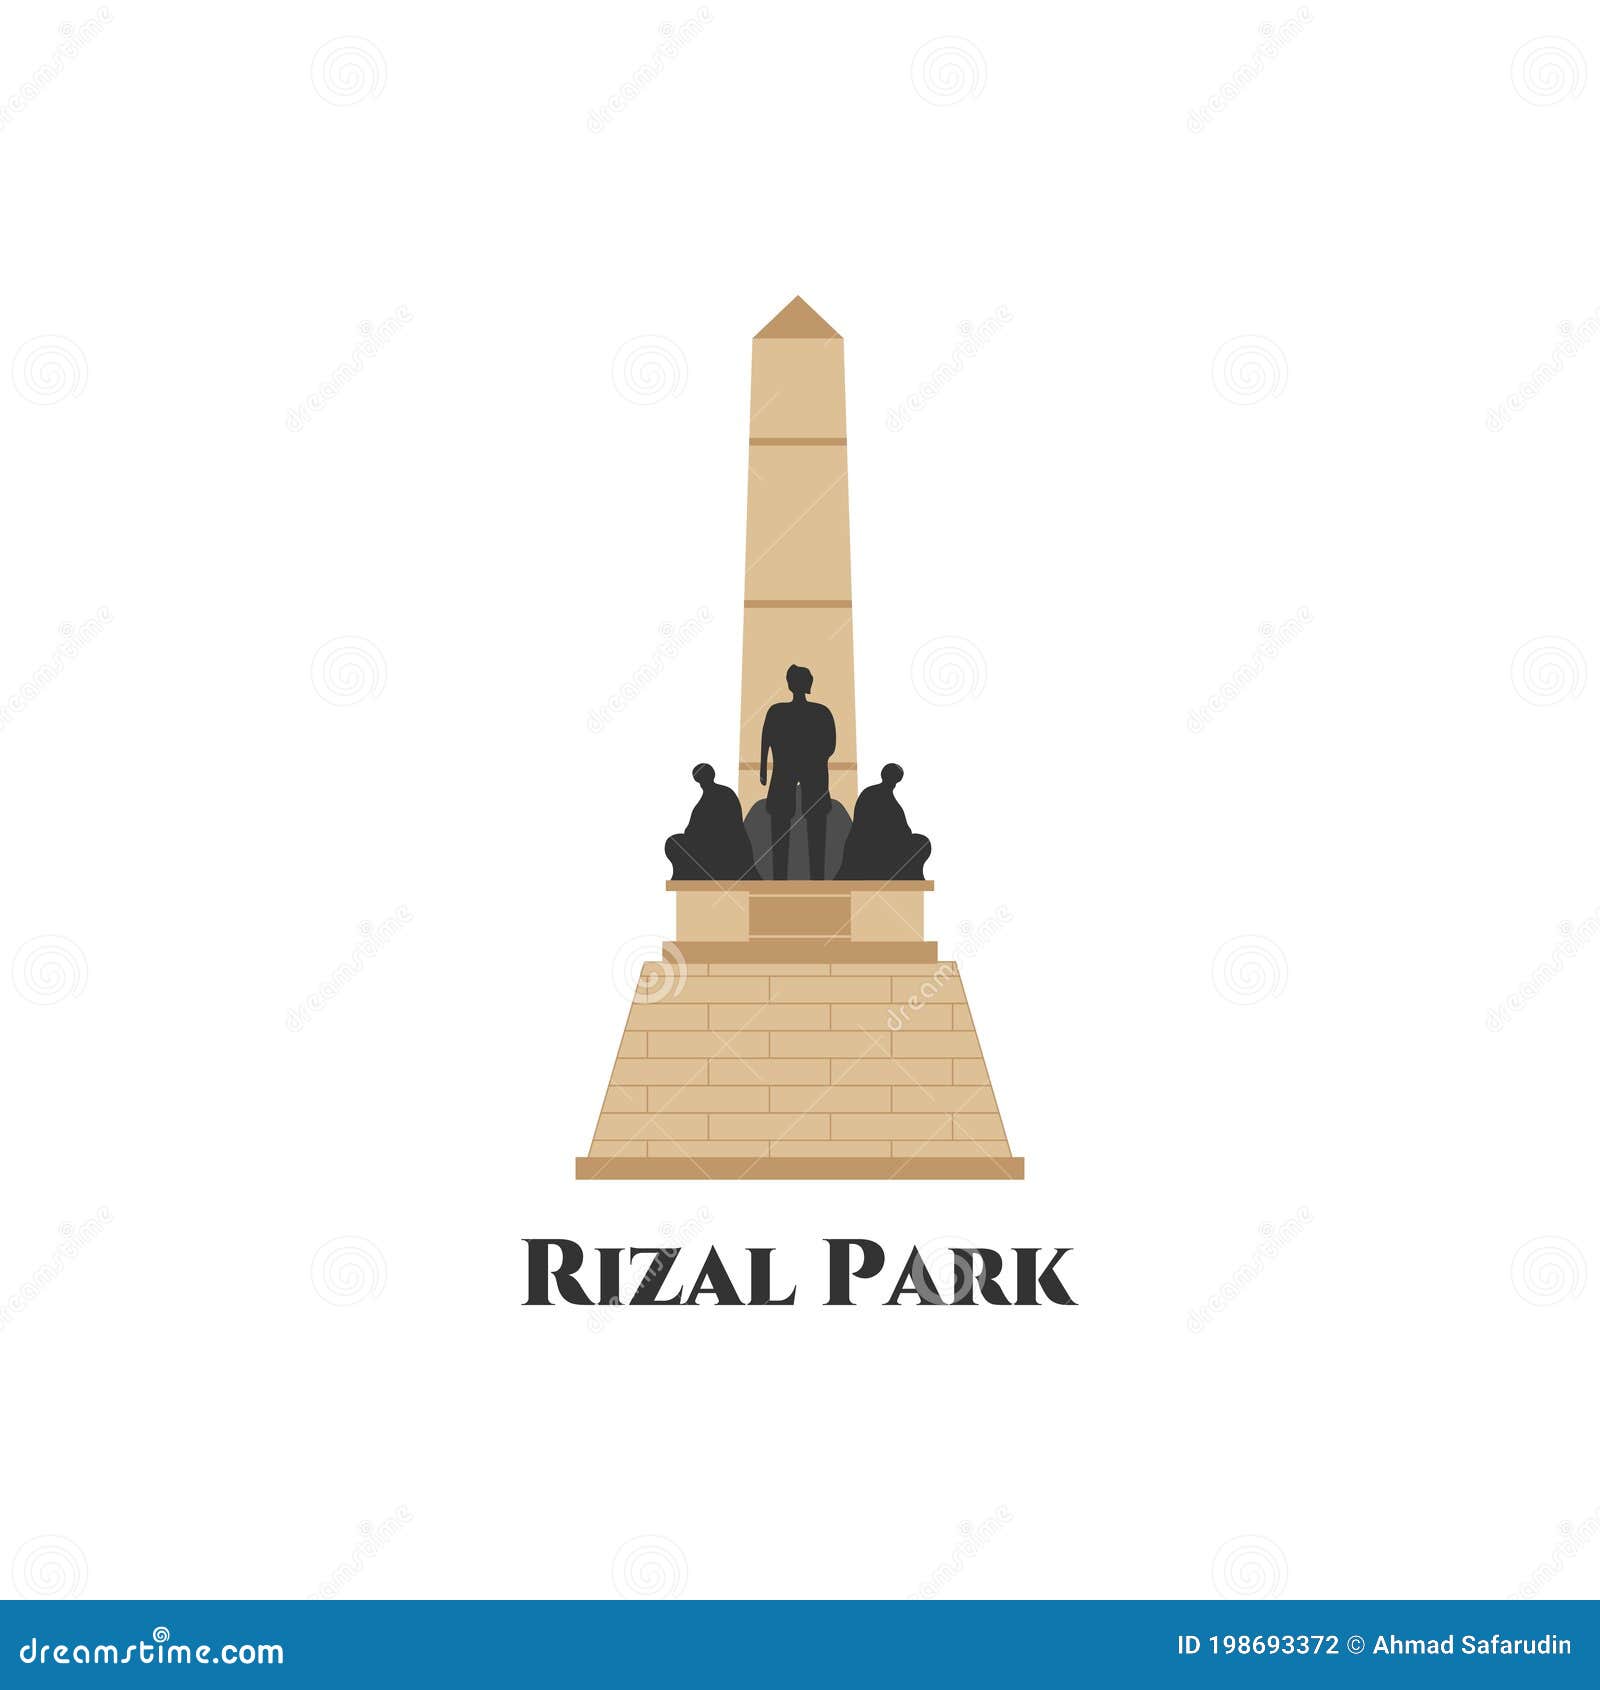  of the rizal monument memorial in rizal park in manila, philippines. minimalistic the most famous landmark .